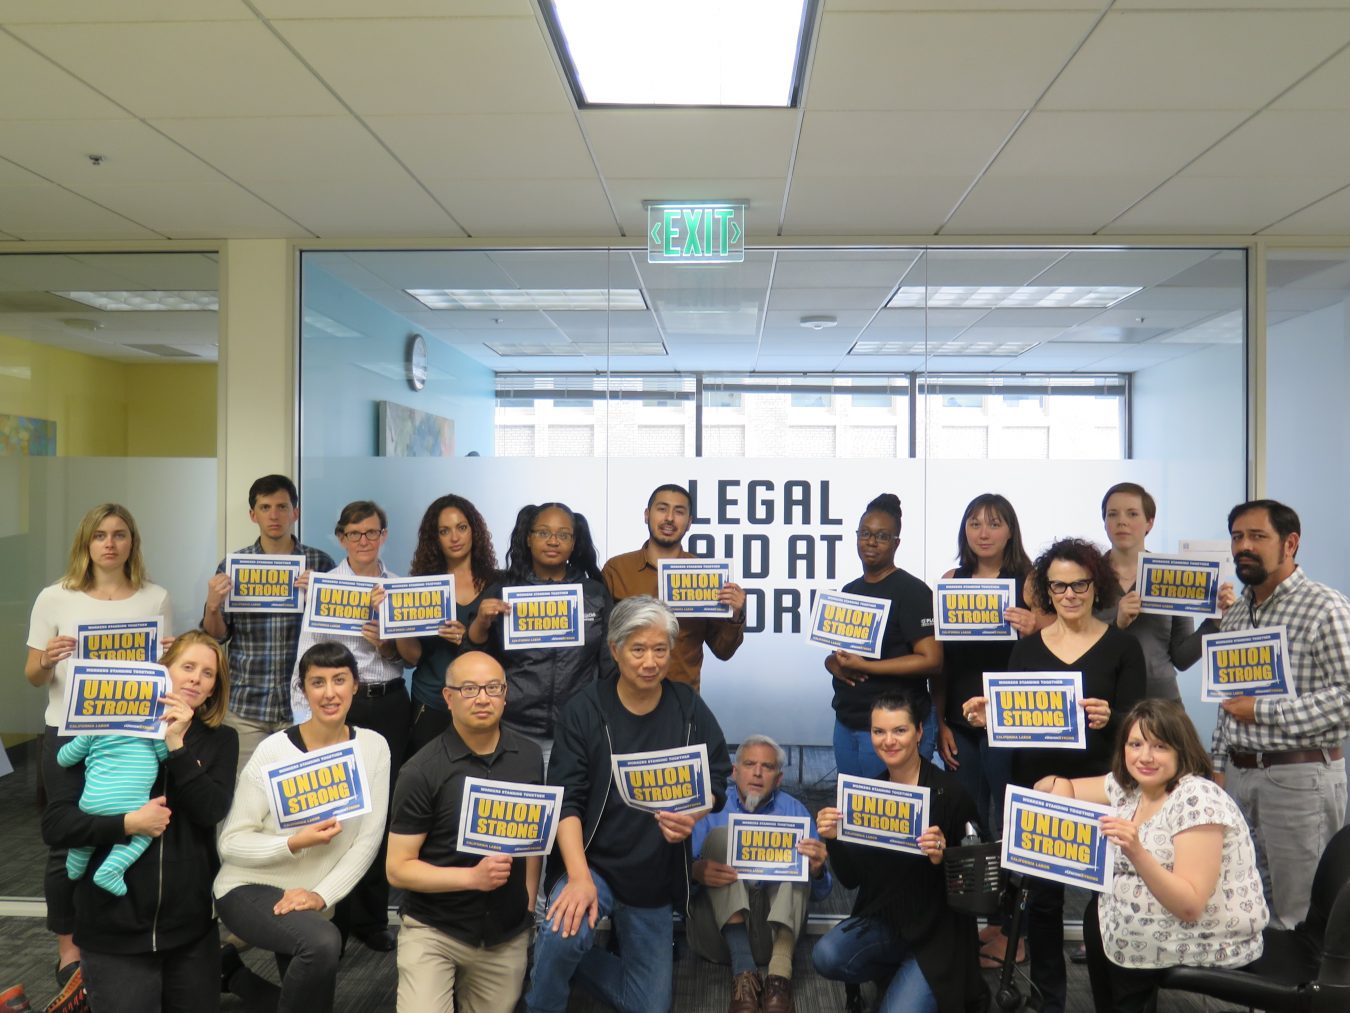 Legal Aid at Work staff members holding up "Union Strong" sign in the office